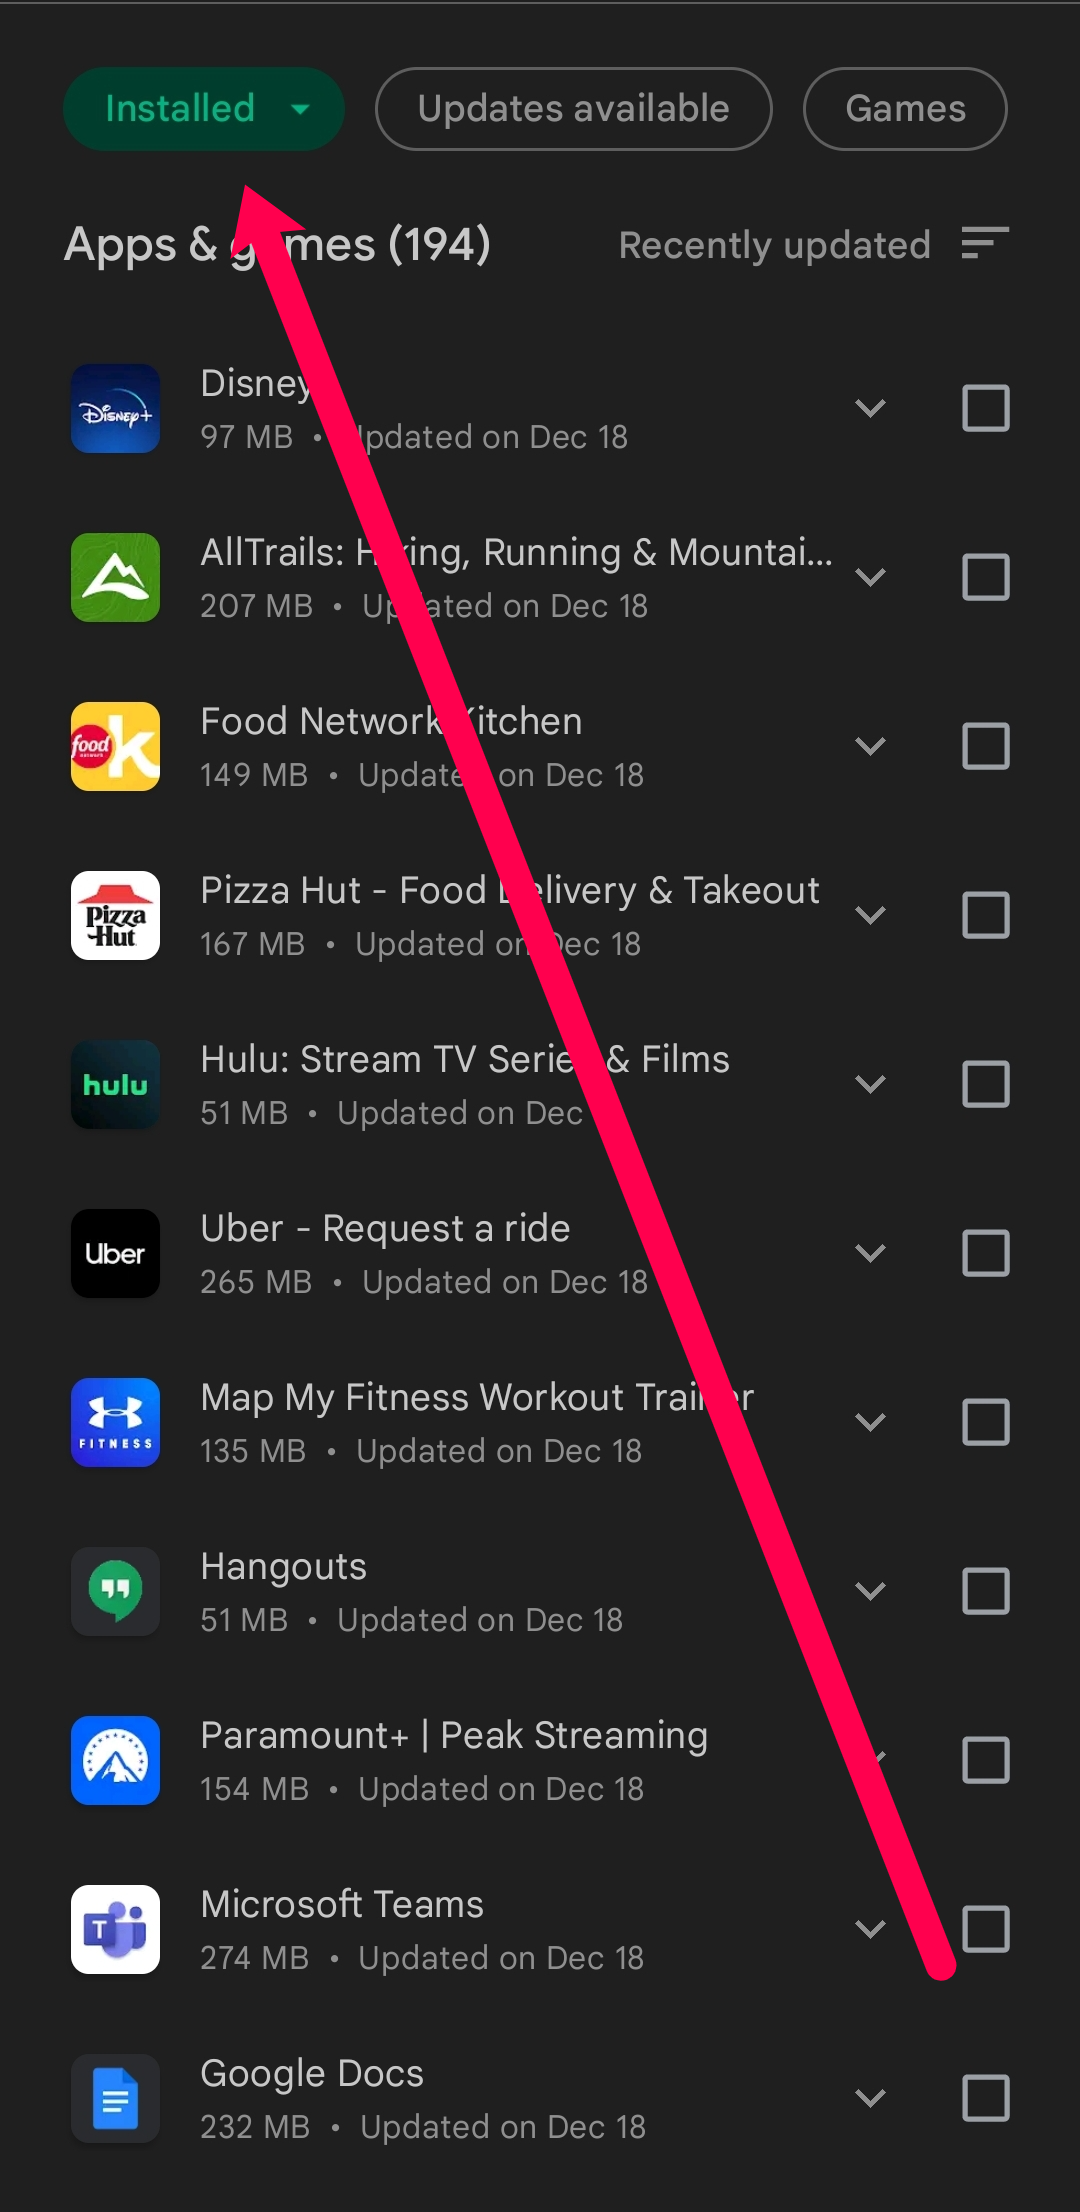 How do I recover an accidentally uninstalled app?